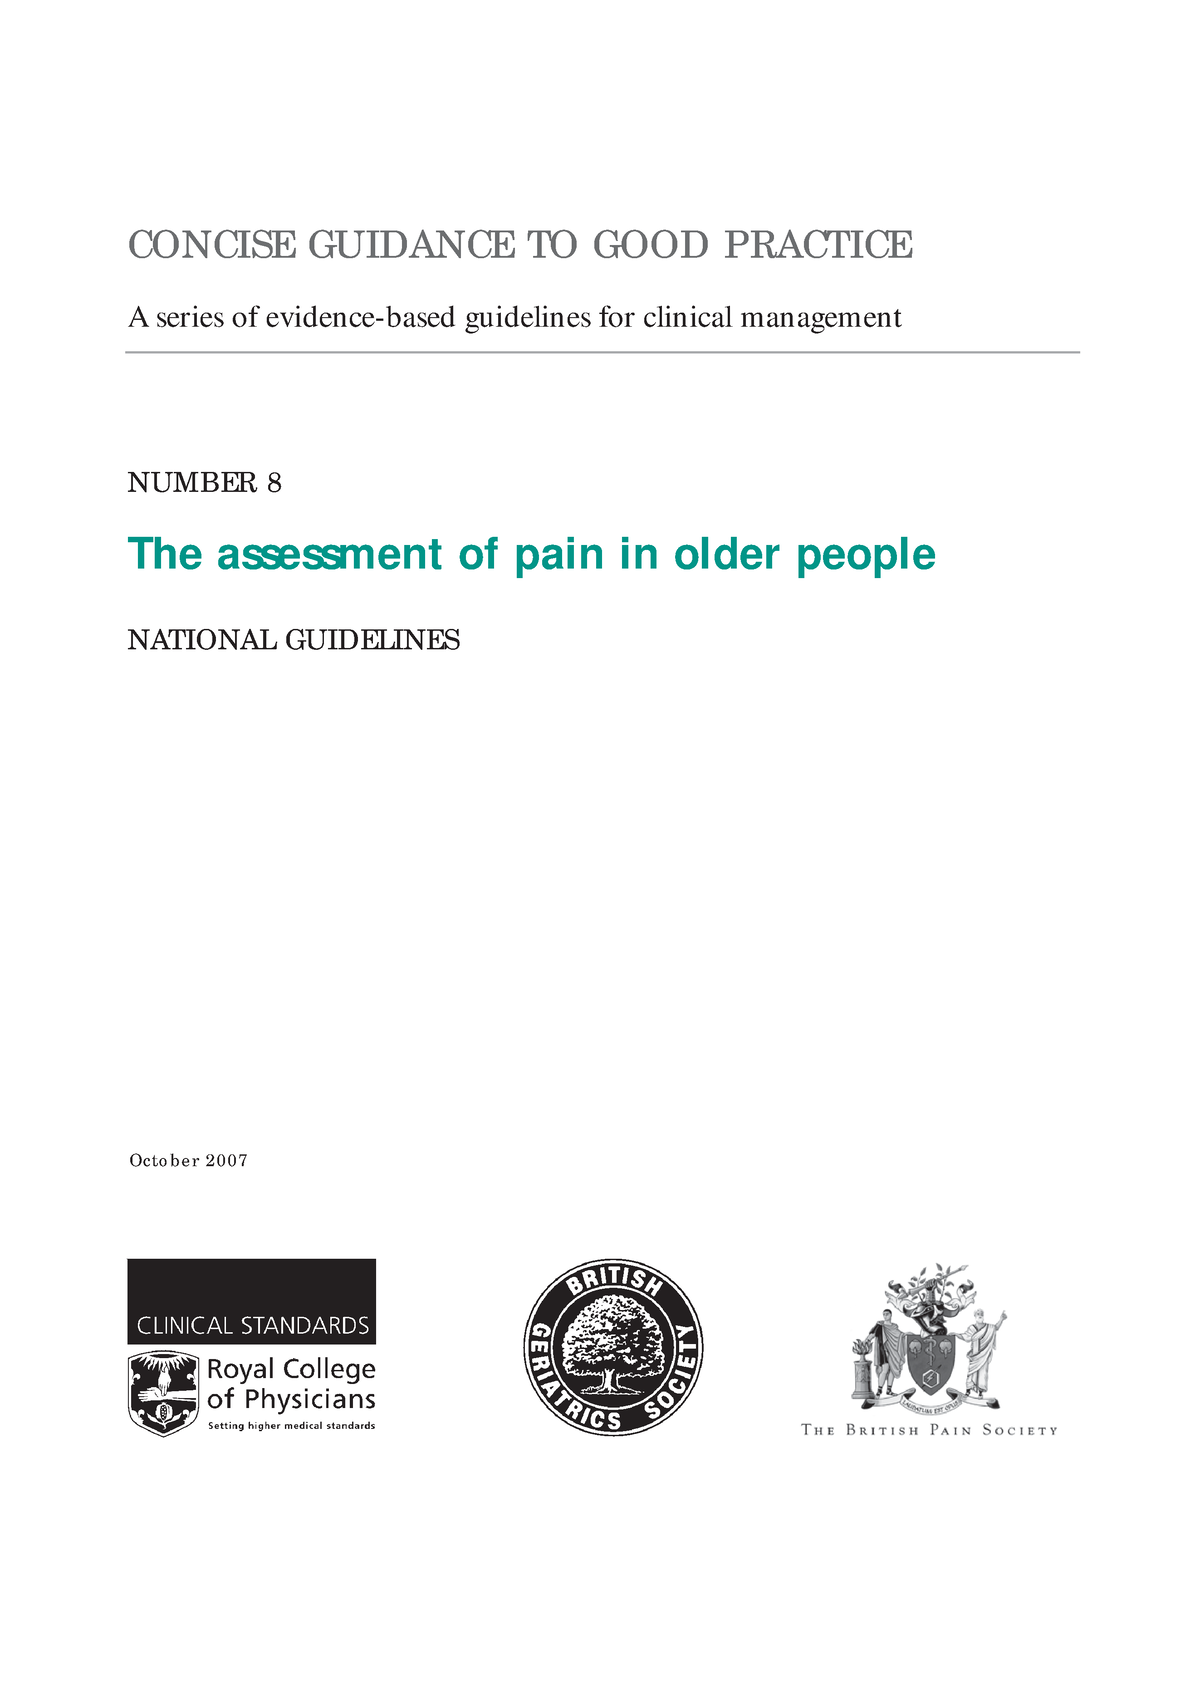 book-pain-older-people-literature-concise-guidance-to-good-practice